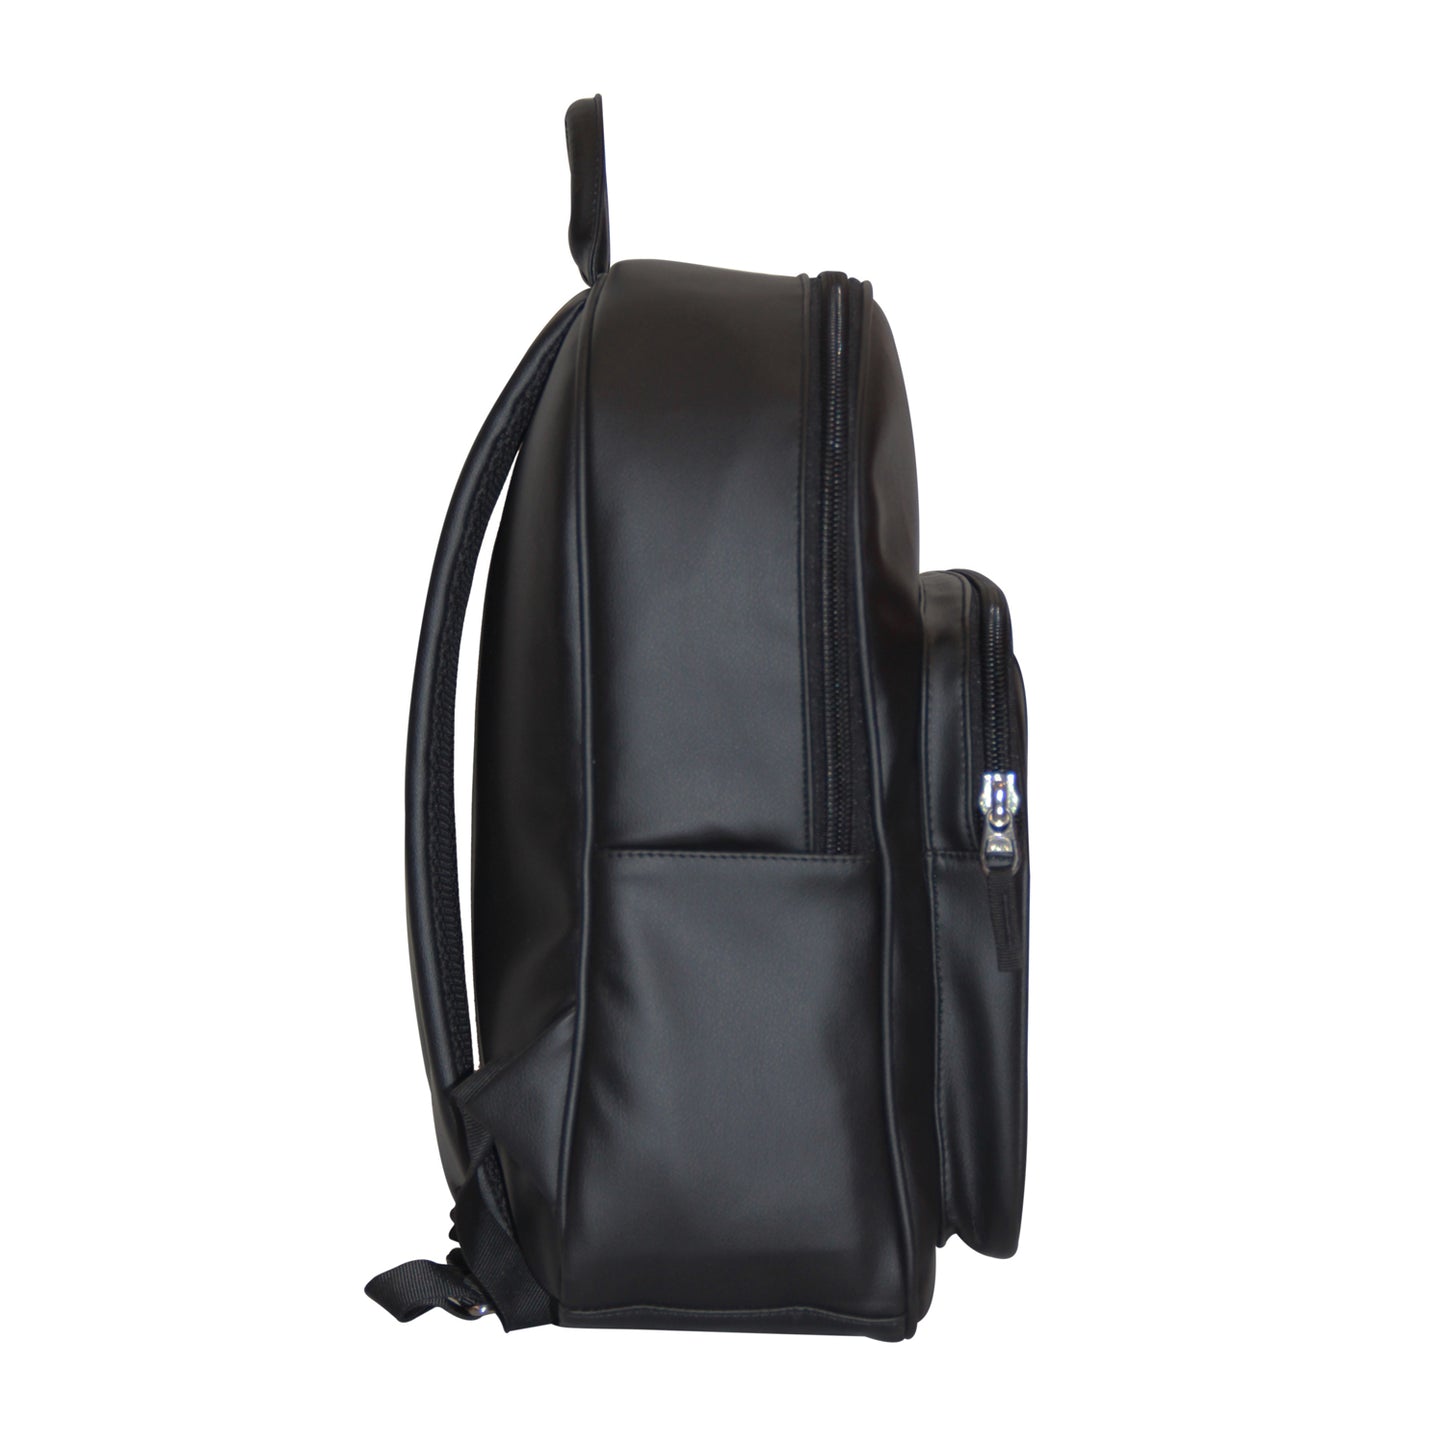 Day-To-Day Backpack